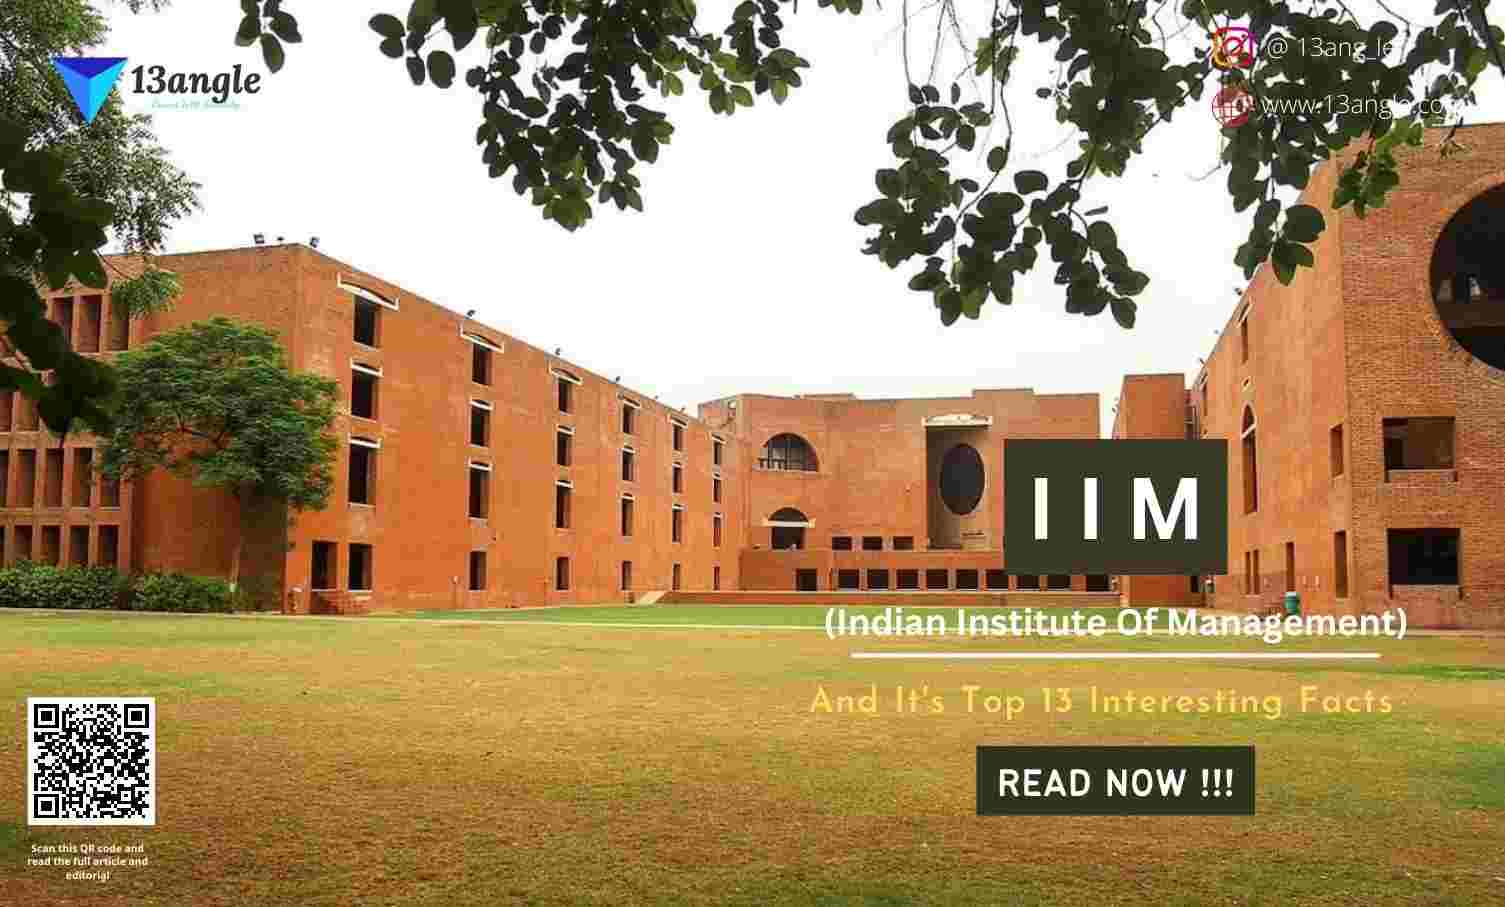 IIM And It's Top 13 Interesting Facts- 13angle.com